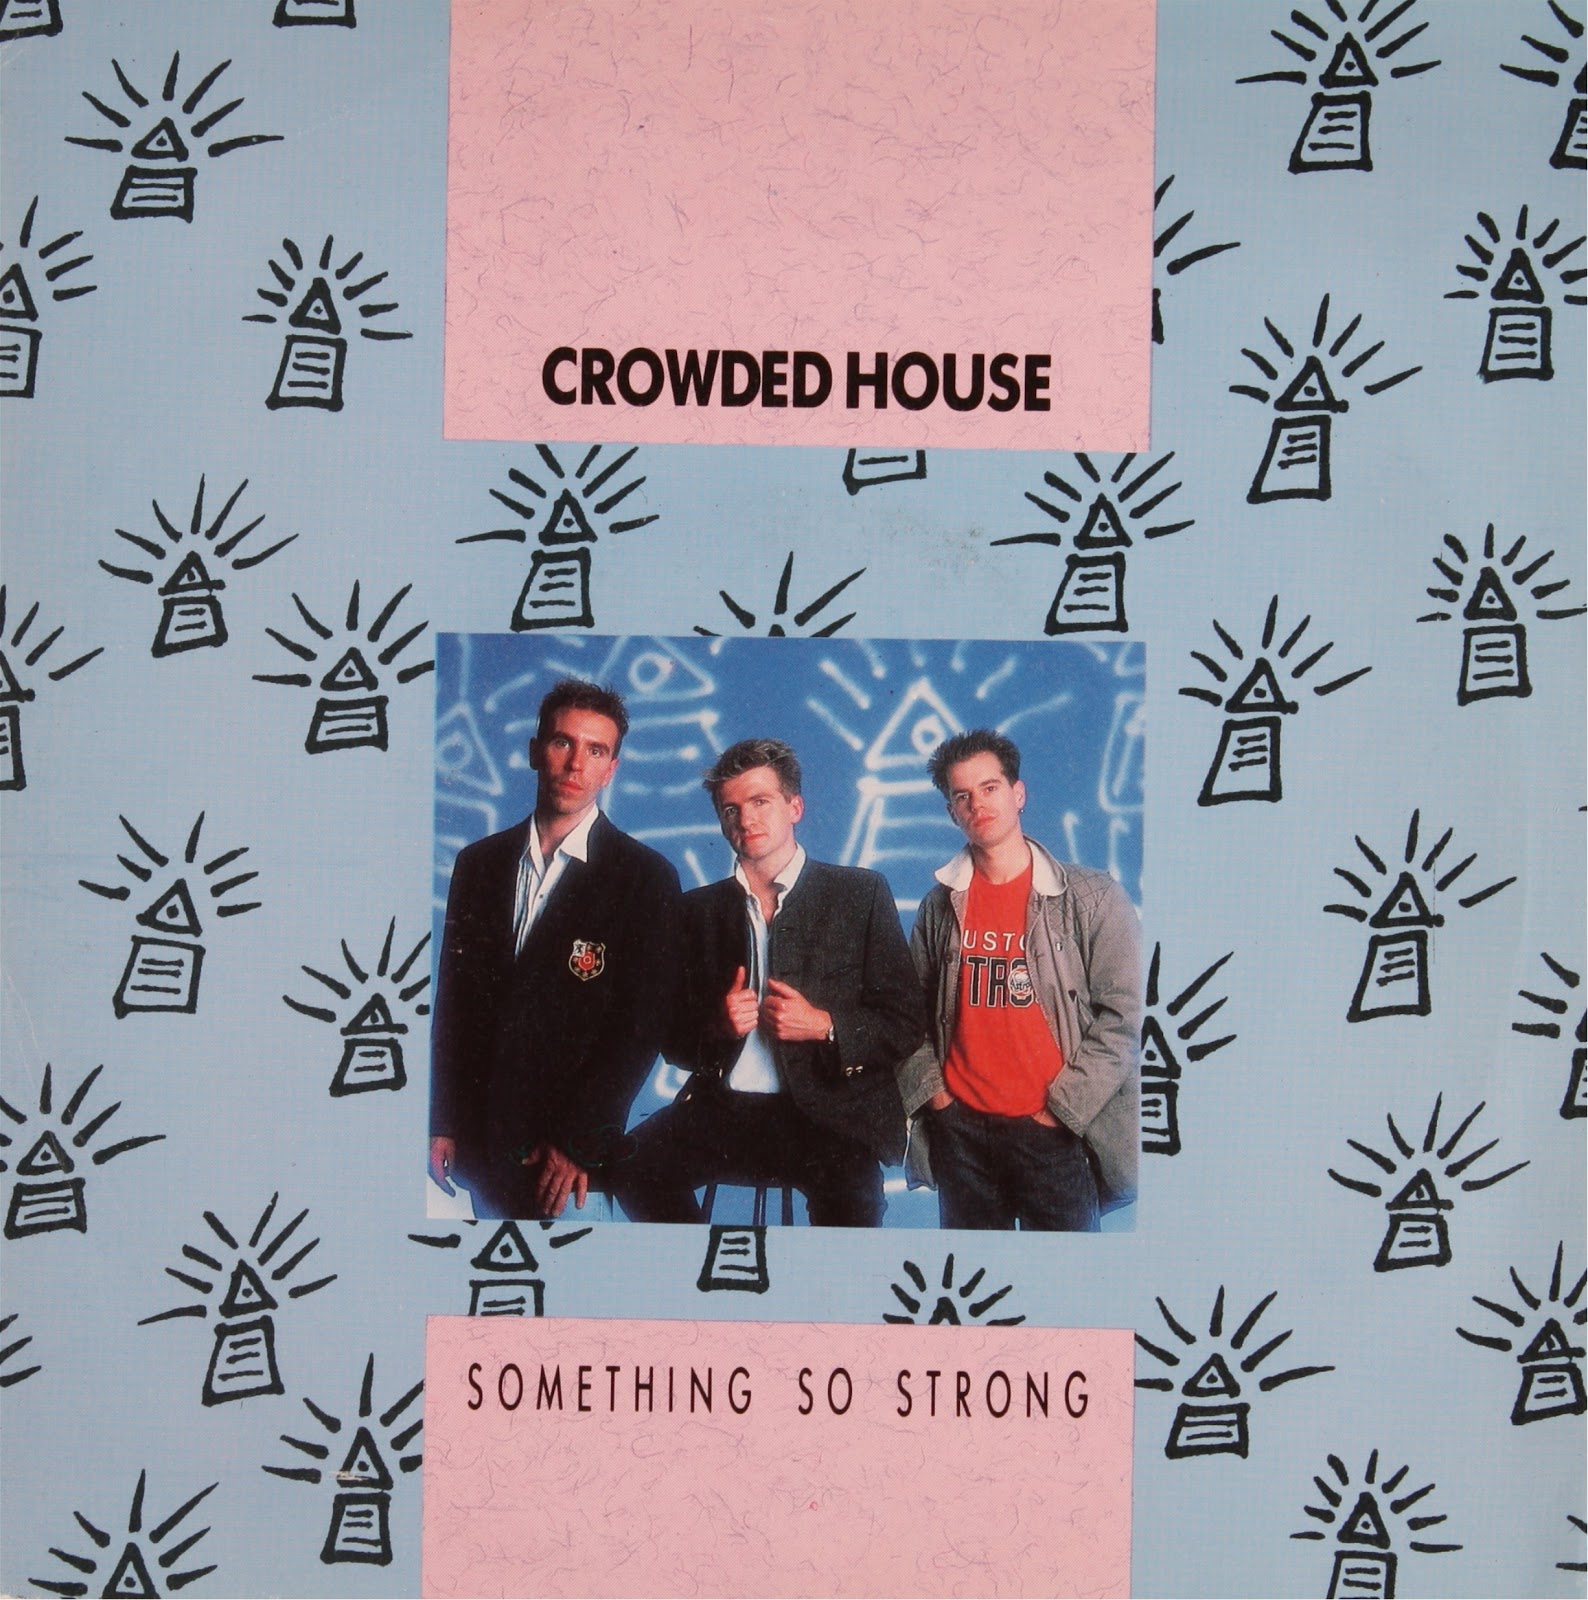 Crowded House 1986. Crowded House обложки. Crowded House обложки альбомов. Группа crowded House альбомы. Crowded house don t dream it s